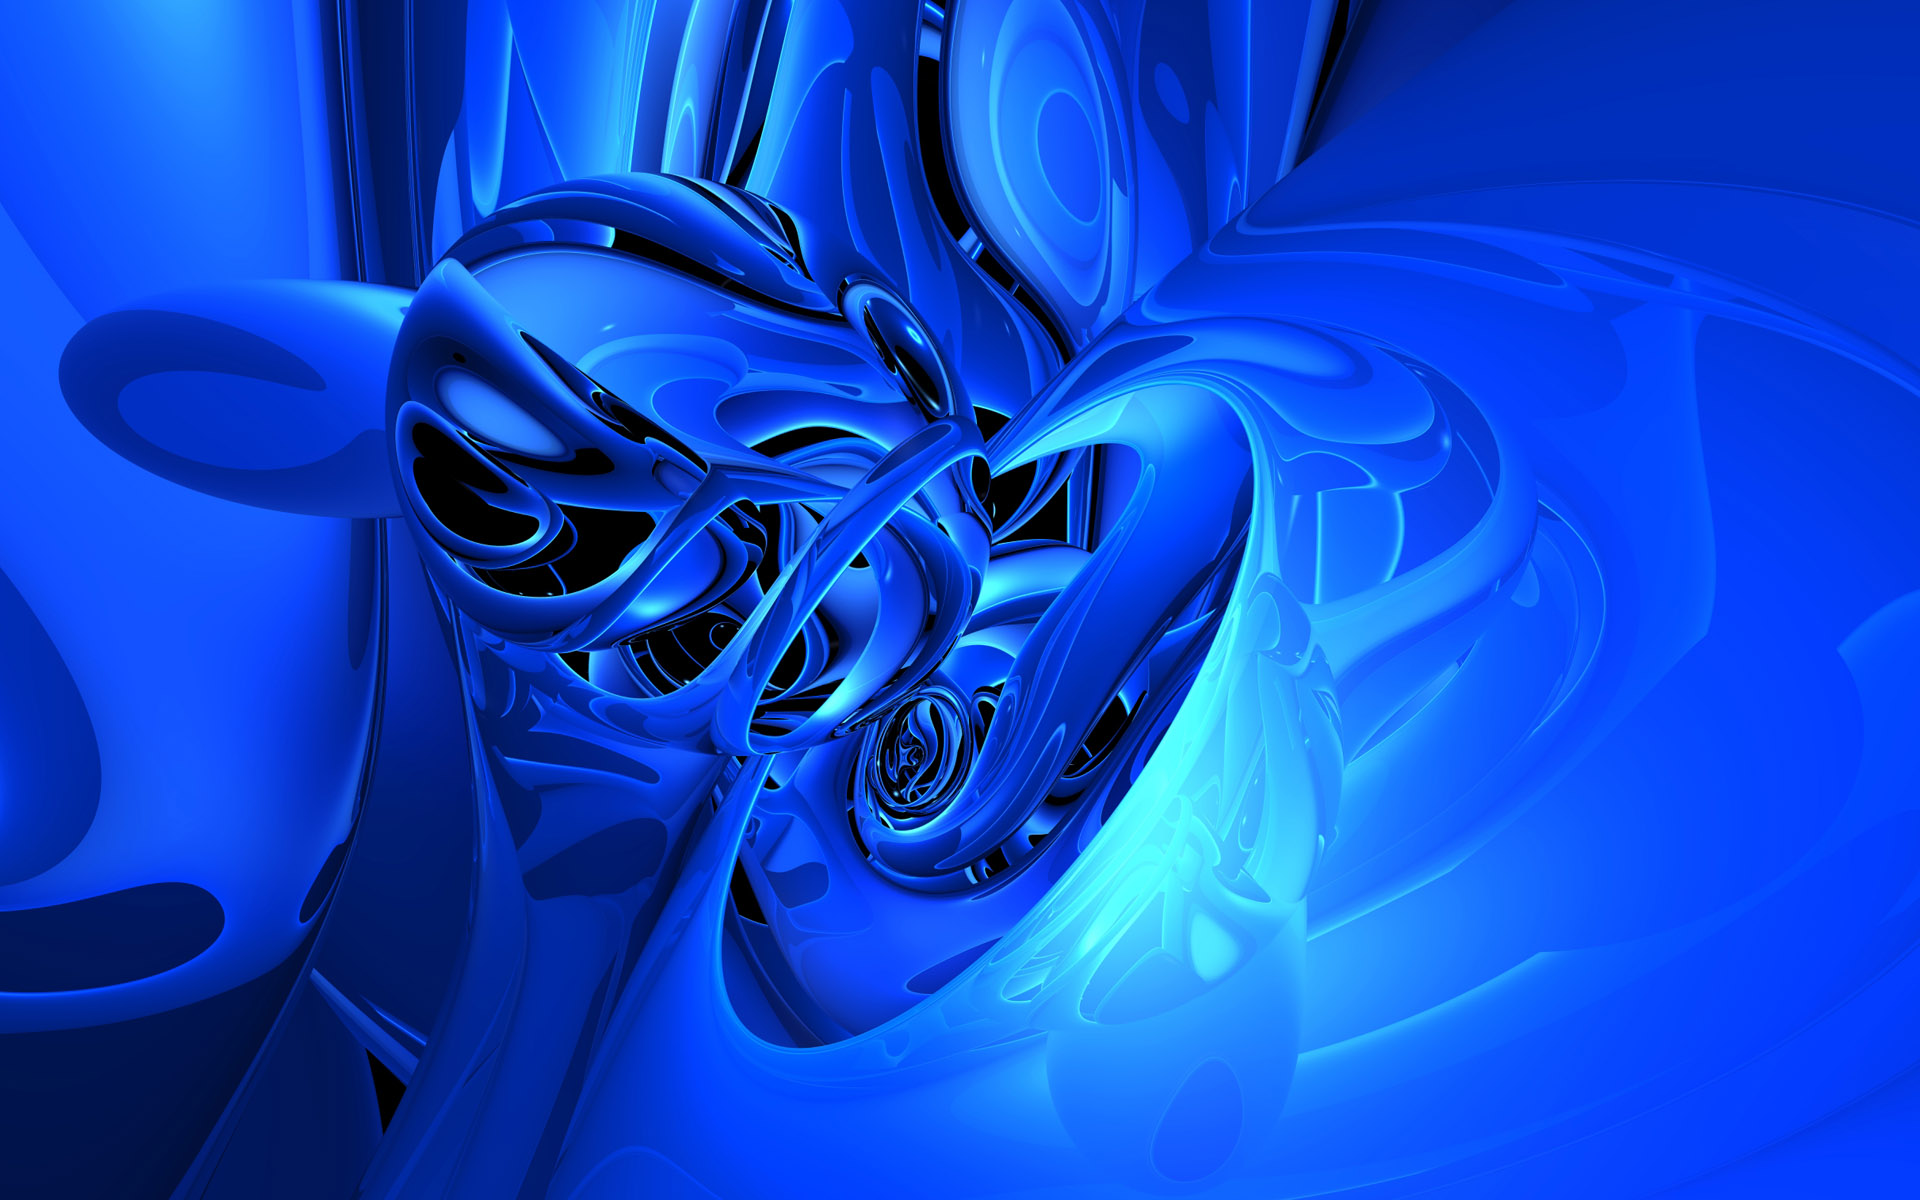 Blue Abstract wallpaper Wallpapers   1920x1200   362314 1920x1200